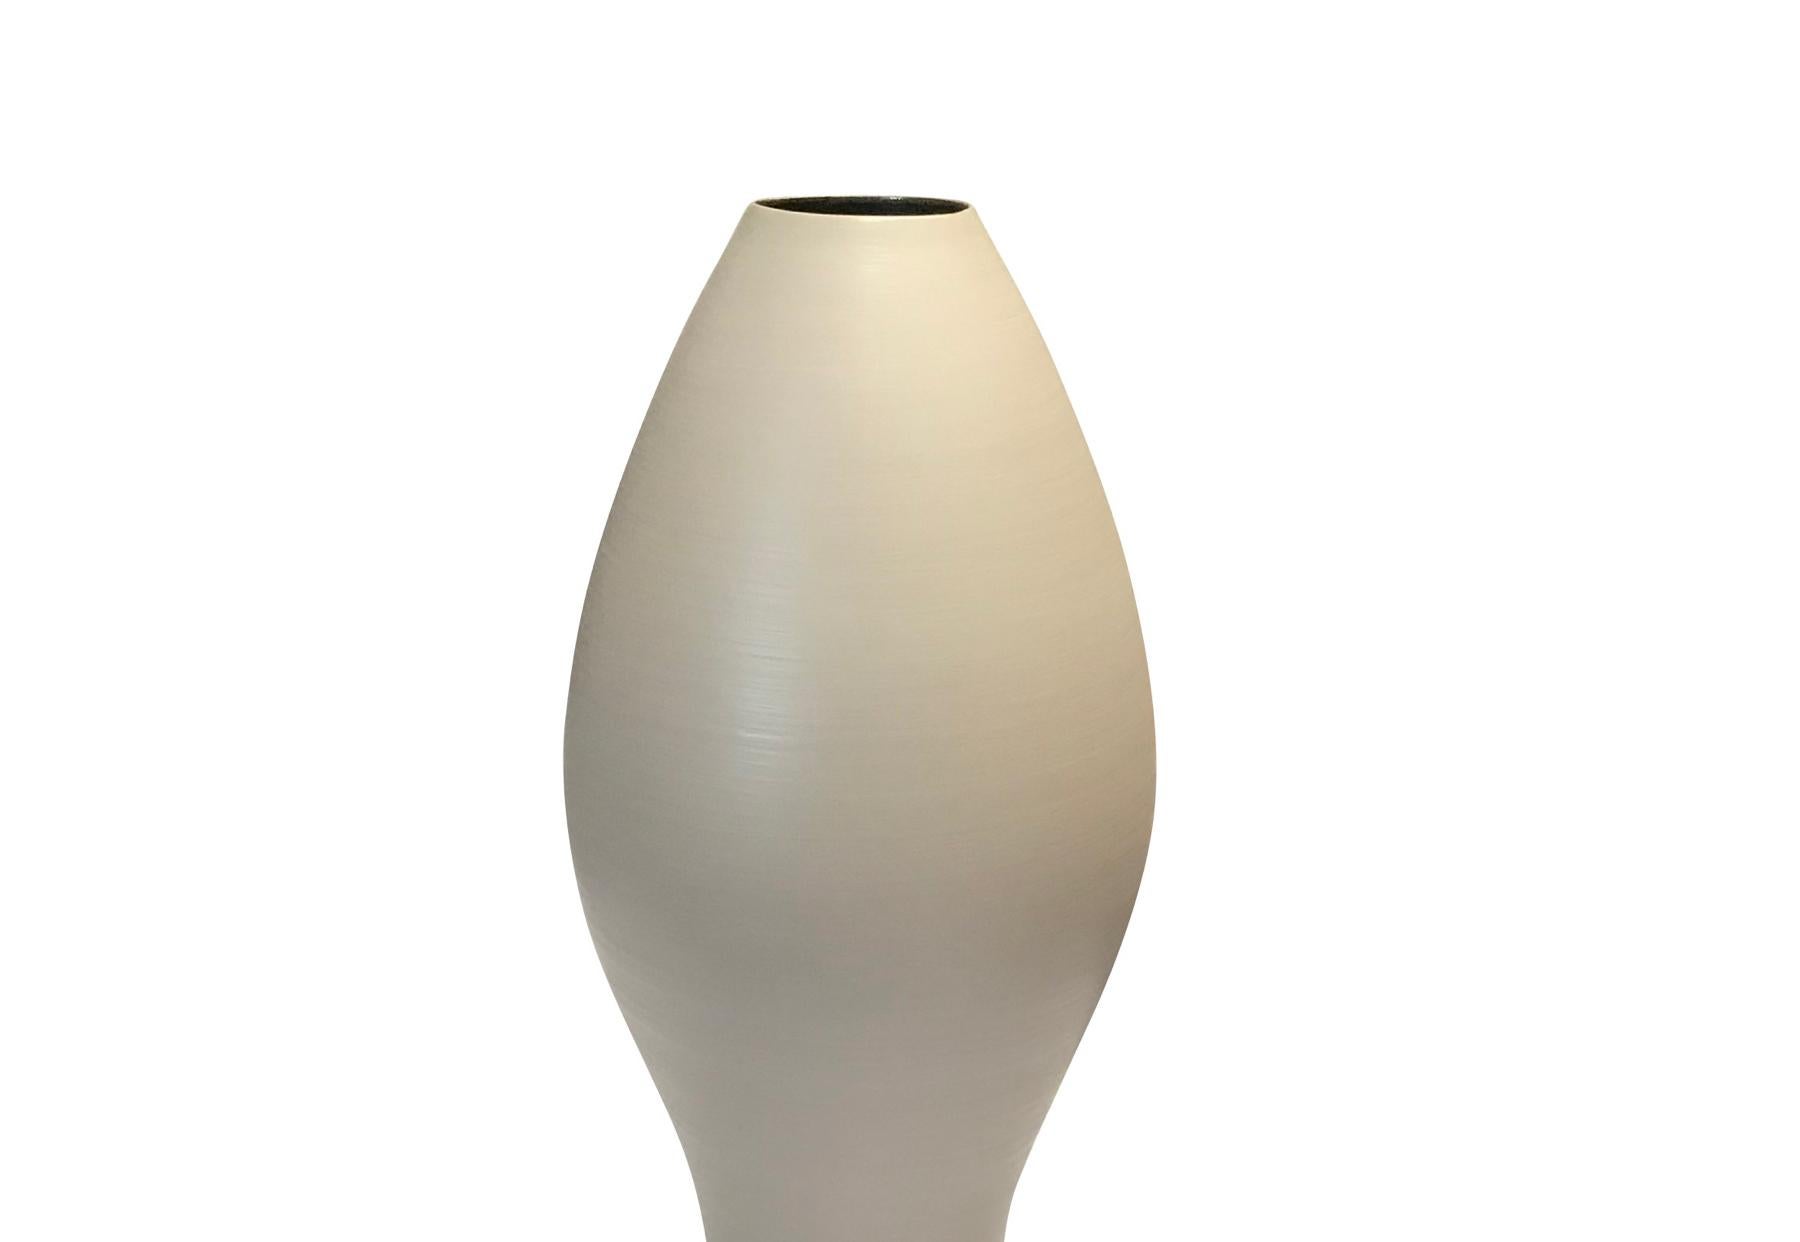 Contemporary Italian extra large curved shape vase
No neck
Handmade
Matte finish / fine ceramic
The same shape is available in large, S5059, see image #4.